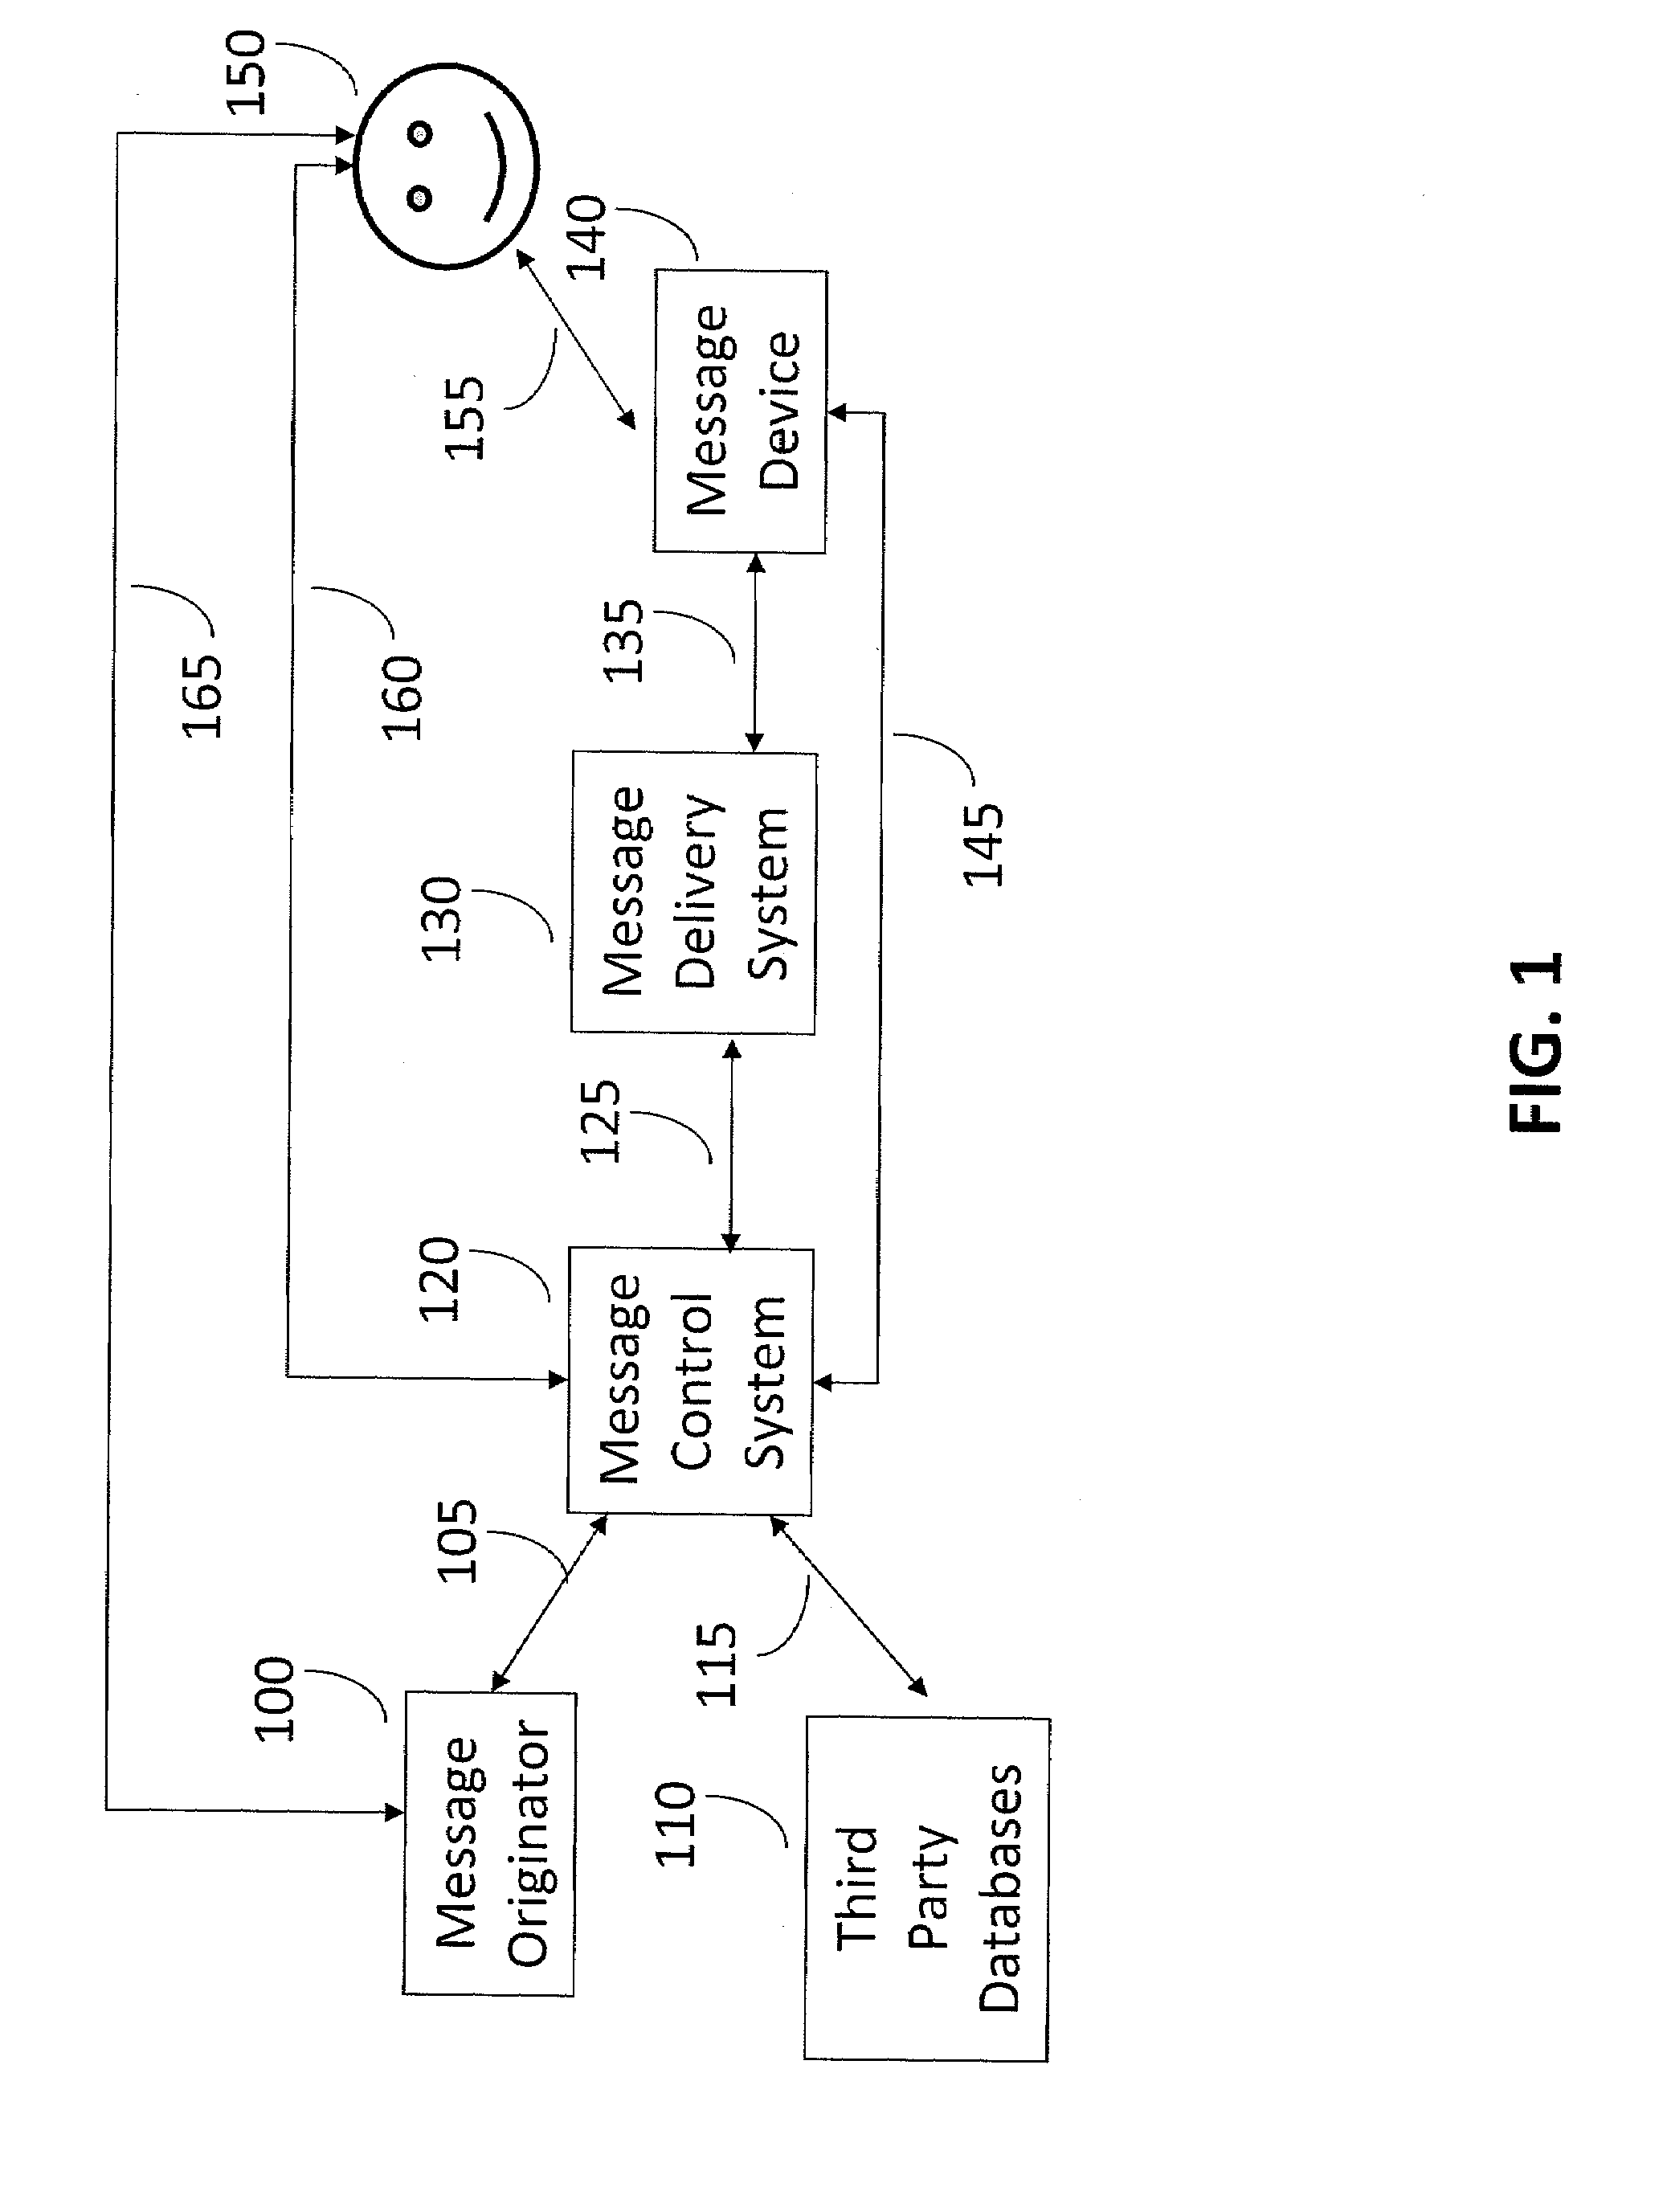 Systems and methods for outputting updated media